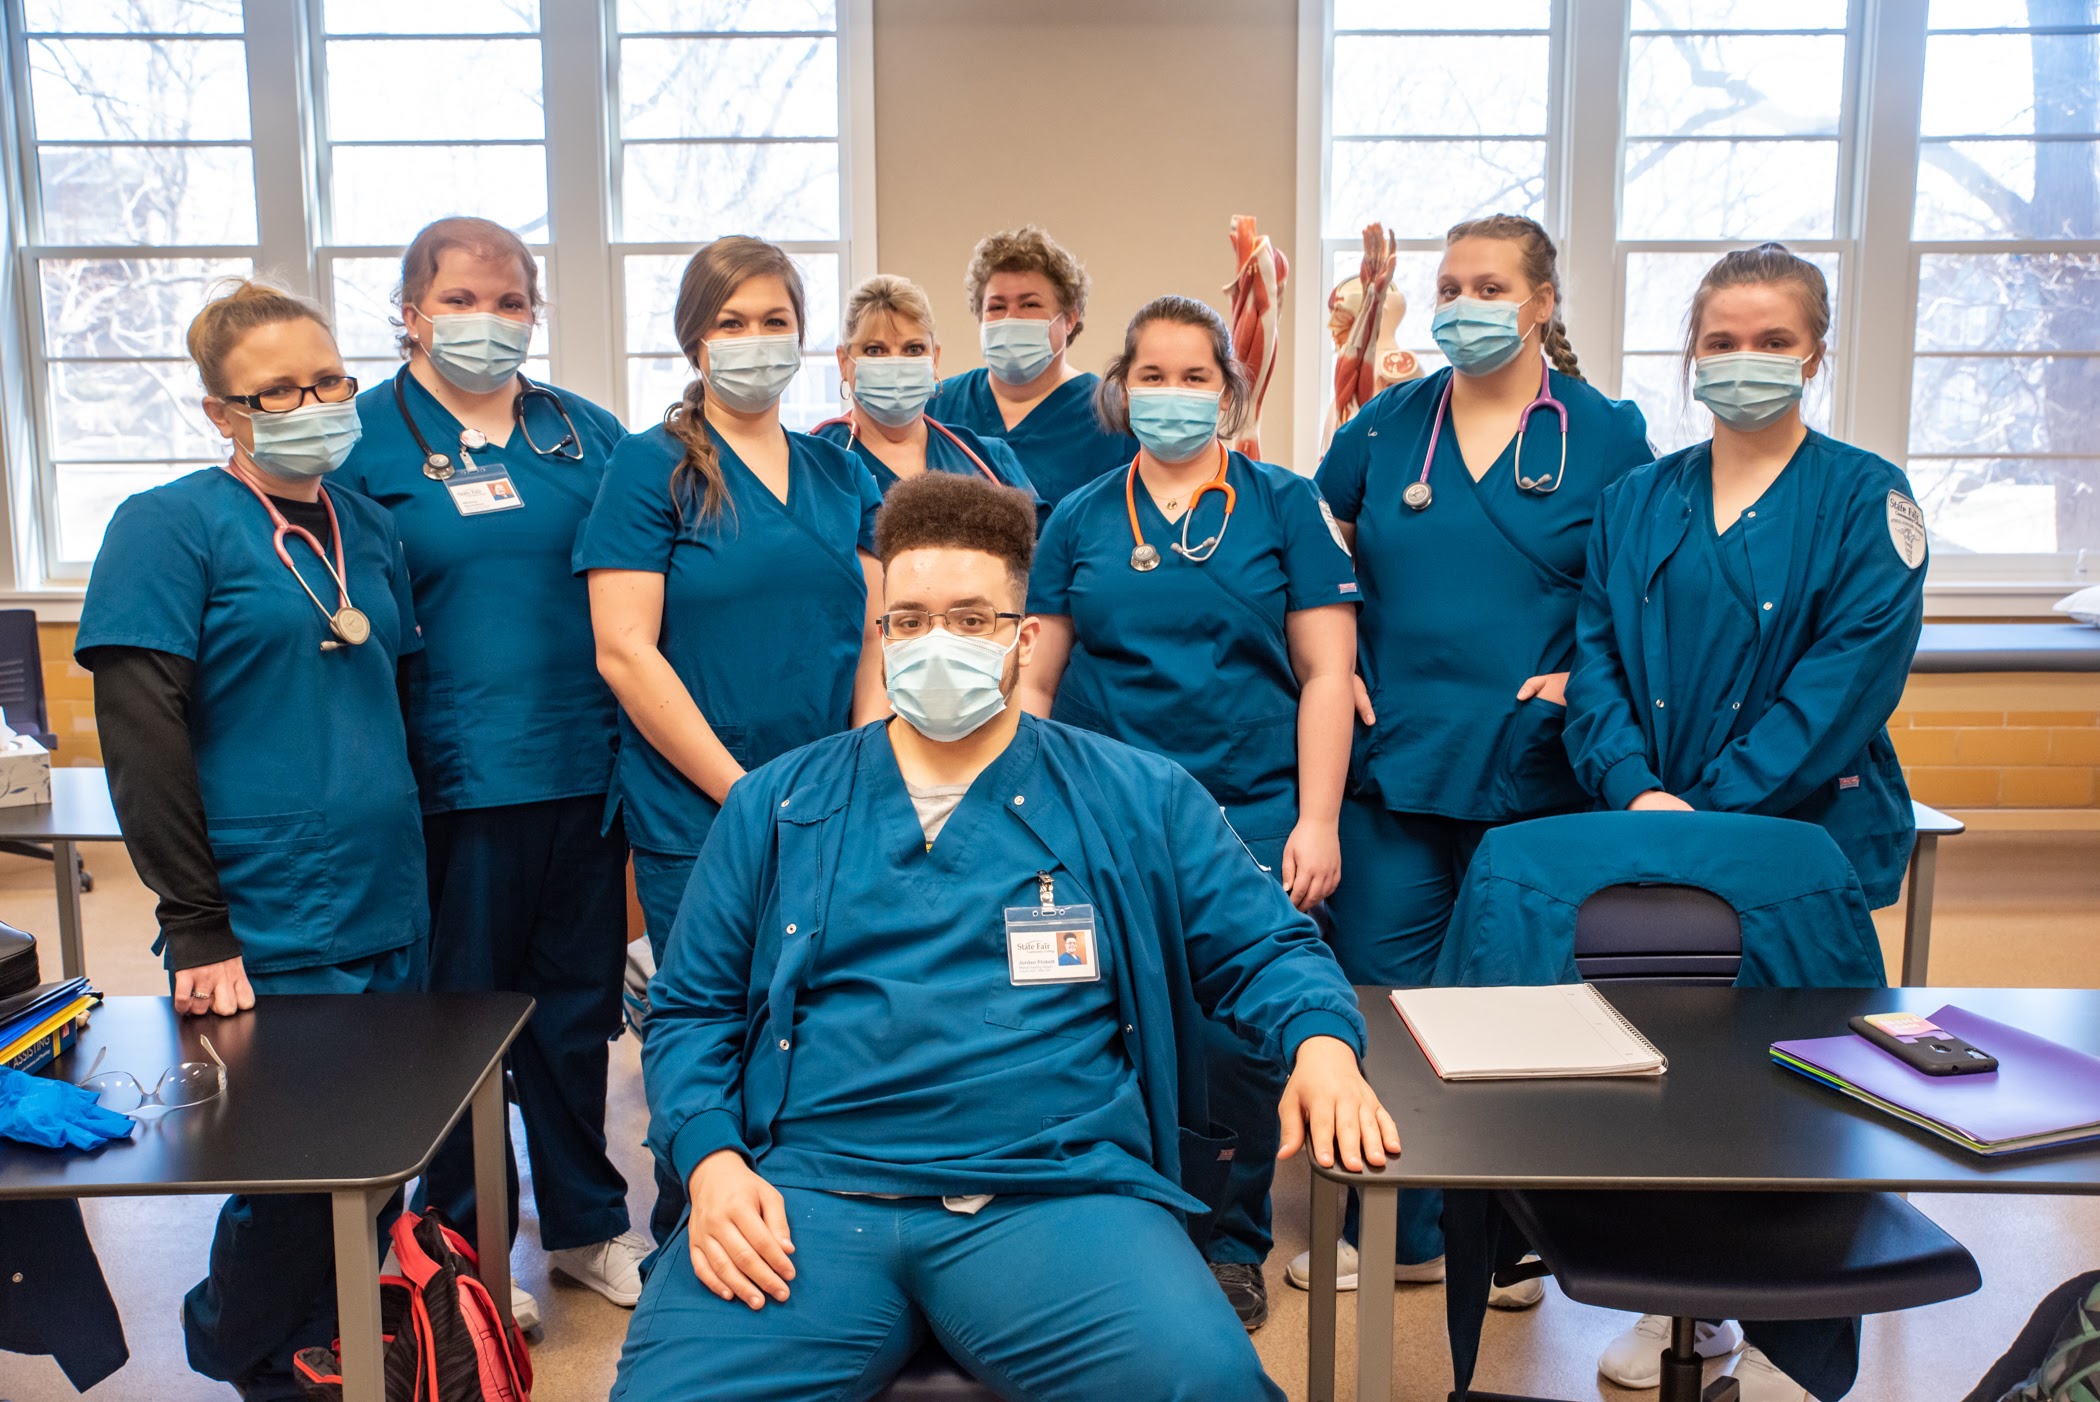 Read more about SFCC-Boonville Medical Assisting program off to a strong start